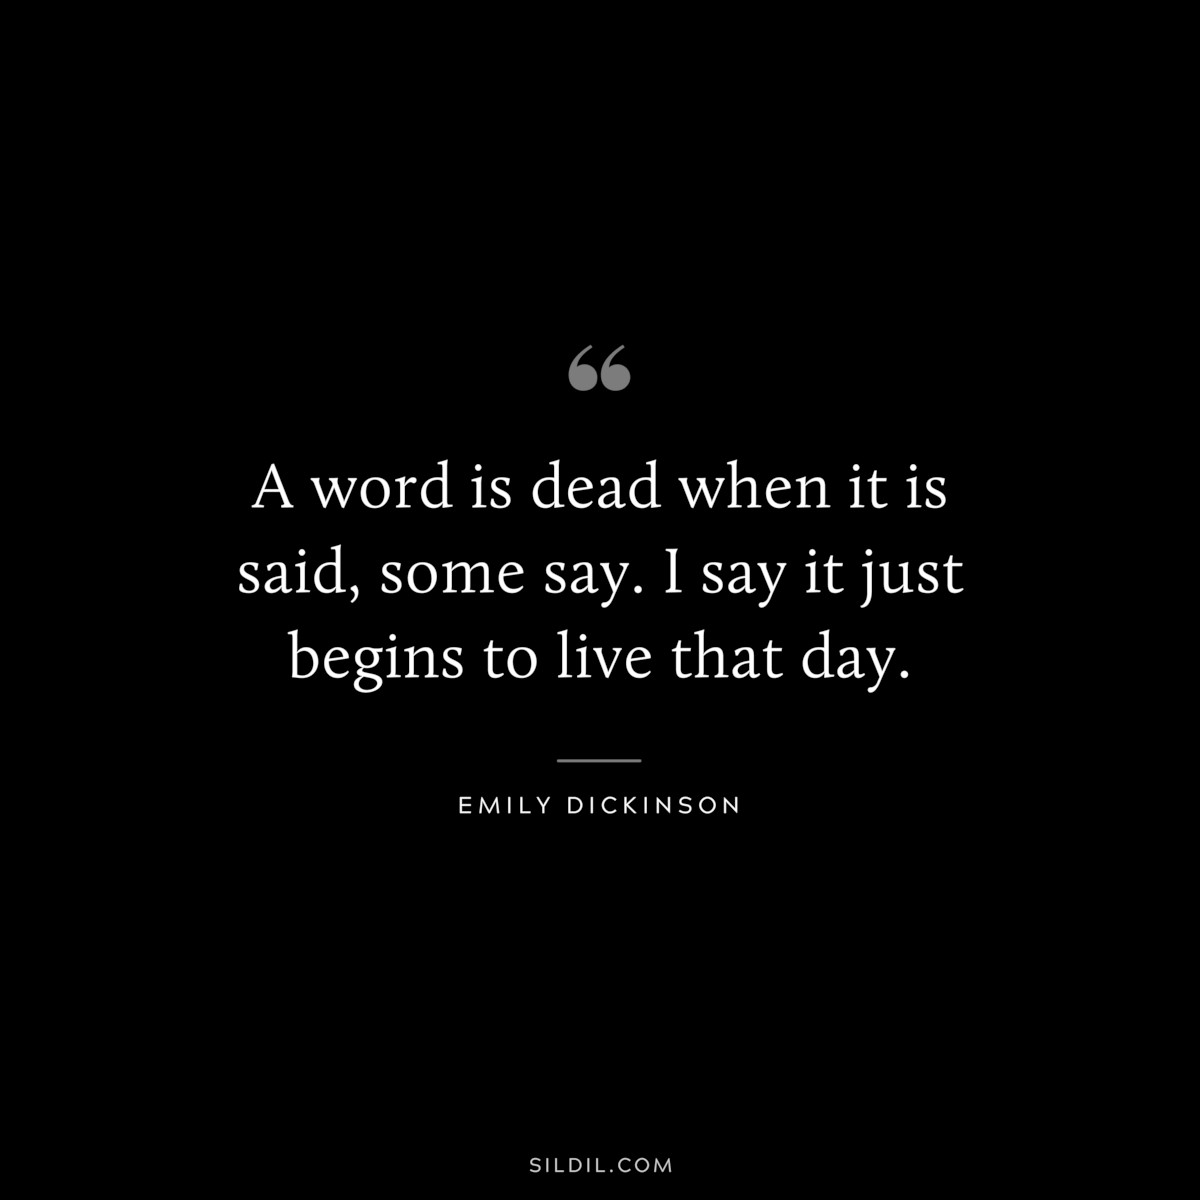 A word is dead when it is said, some say. I say it just begins to live that day.